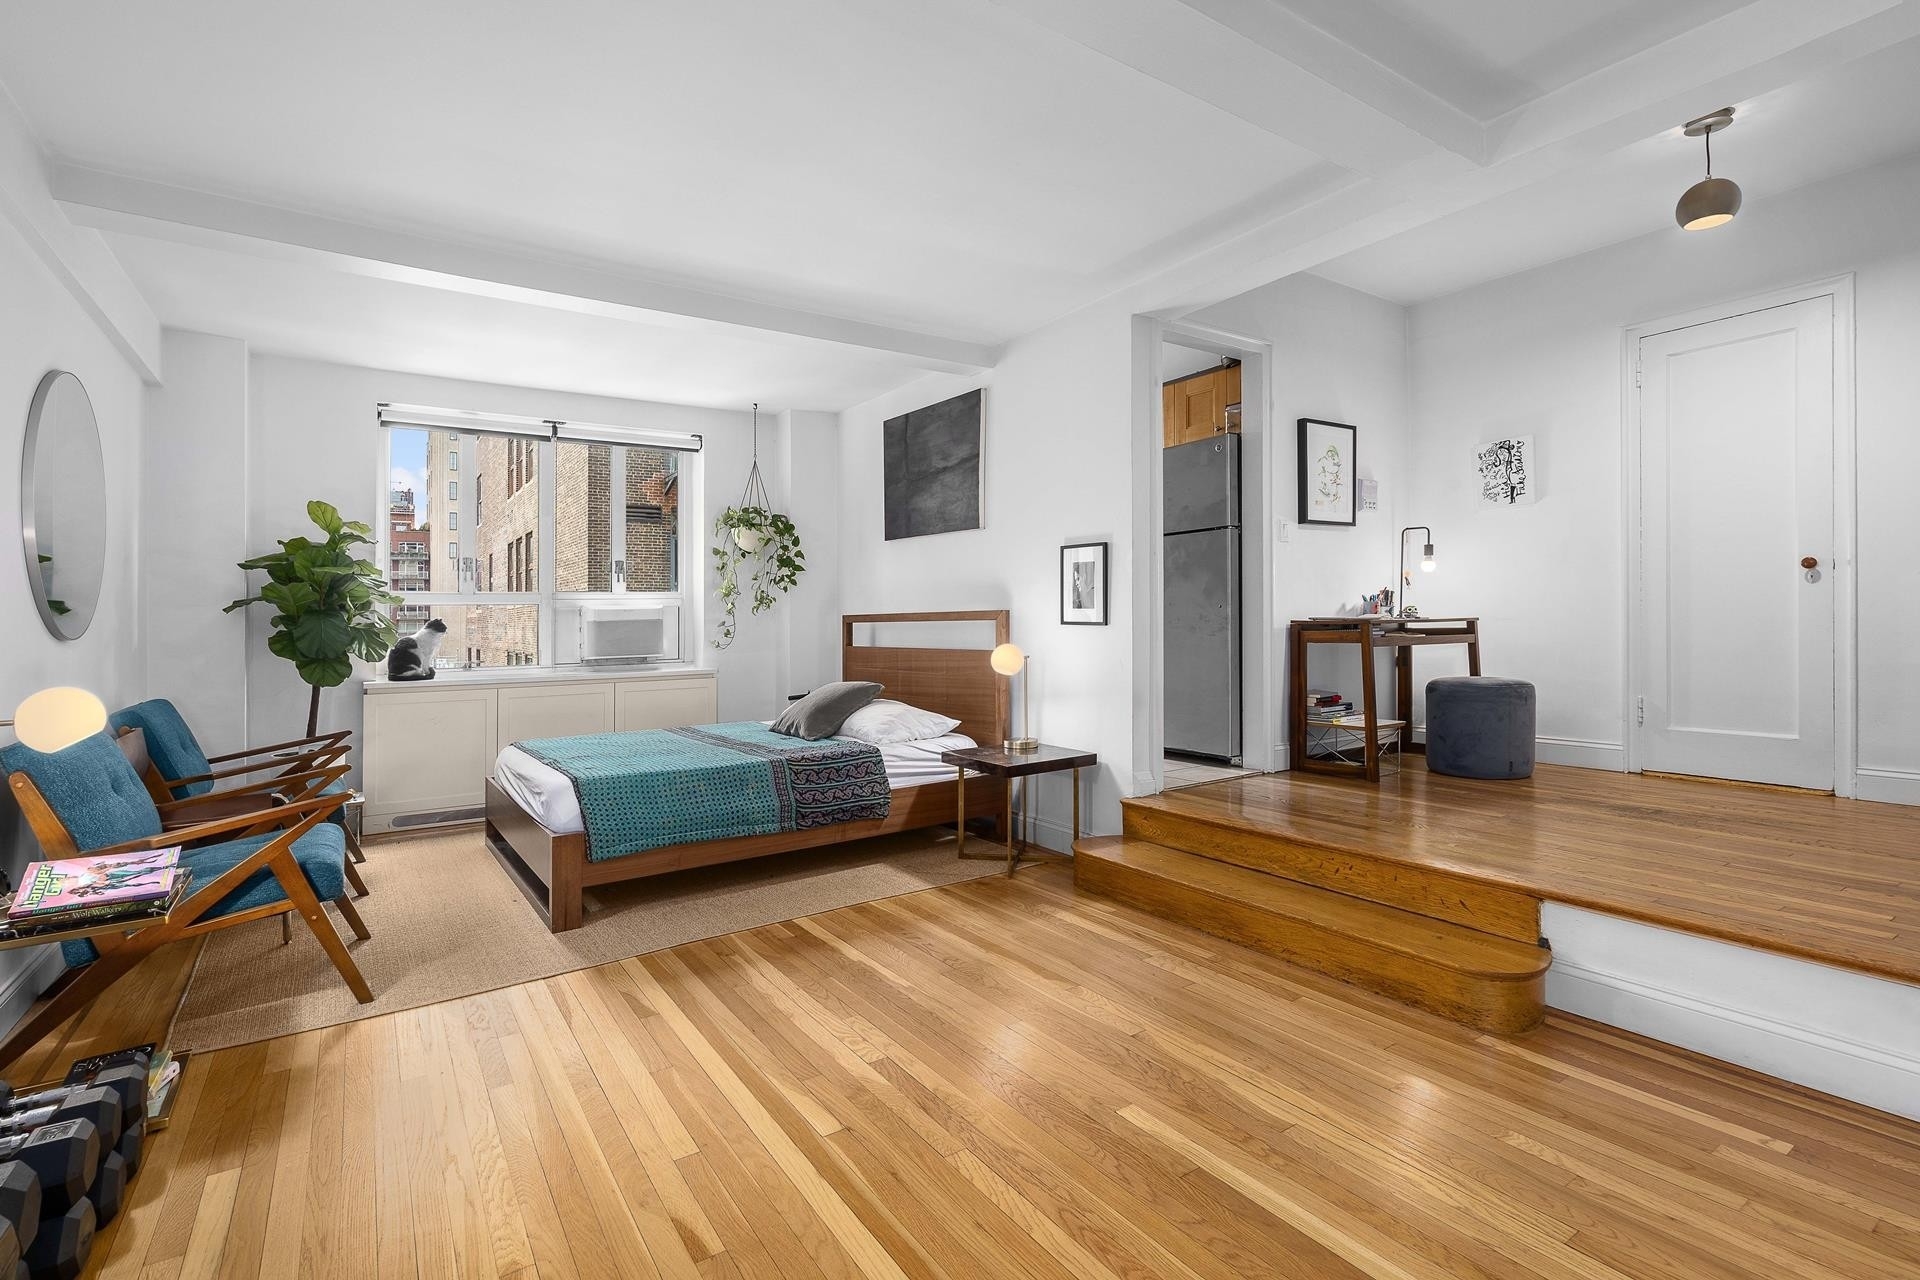 Co-op Properties for Sale at KENSINGTON HOUSE, 200 W 20TH ST, 916 Chelsea, New York, NY 10011